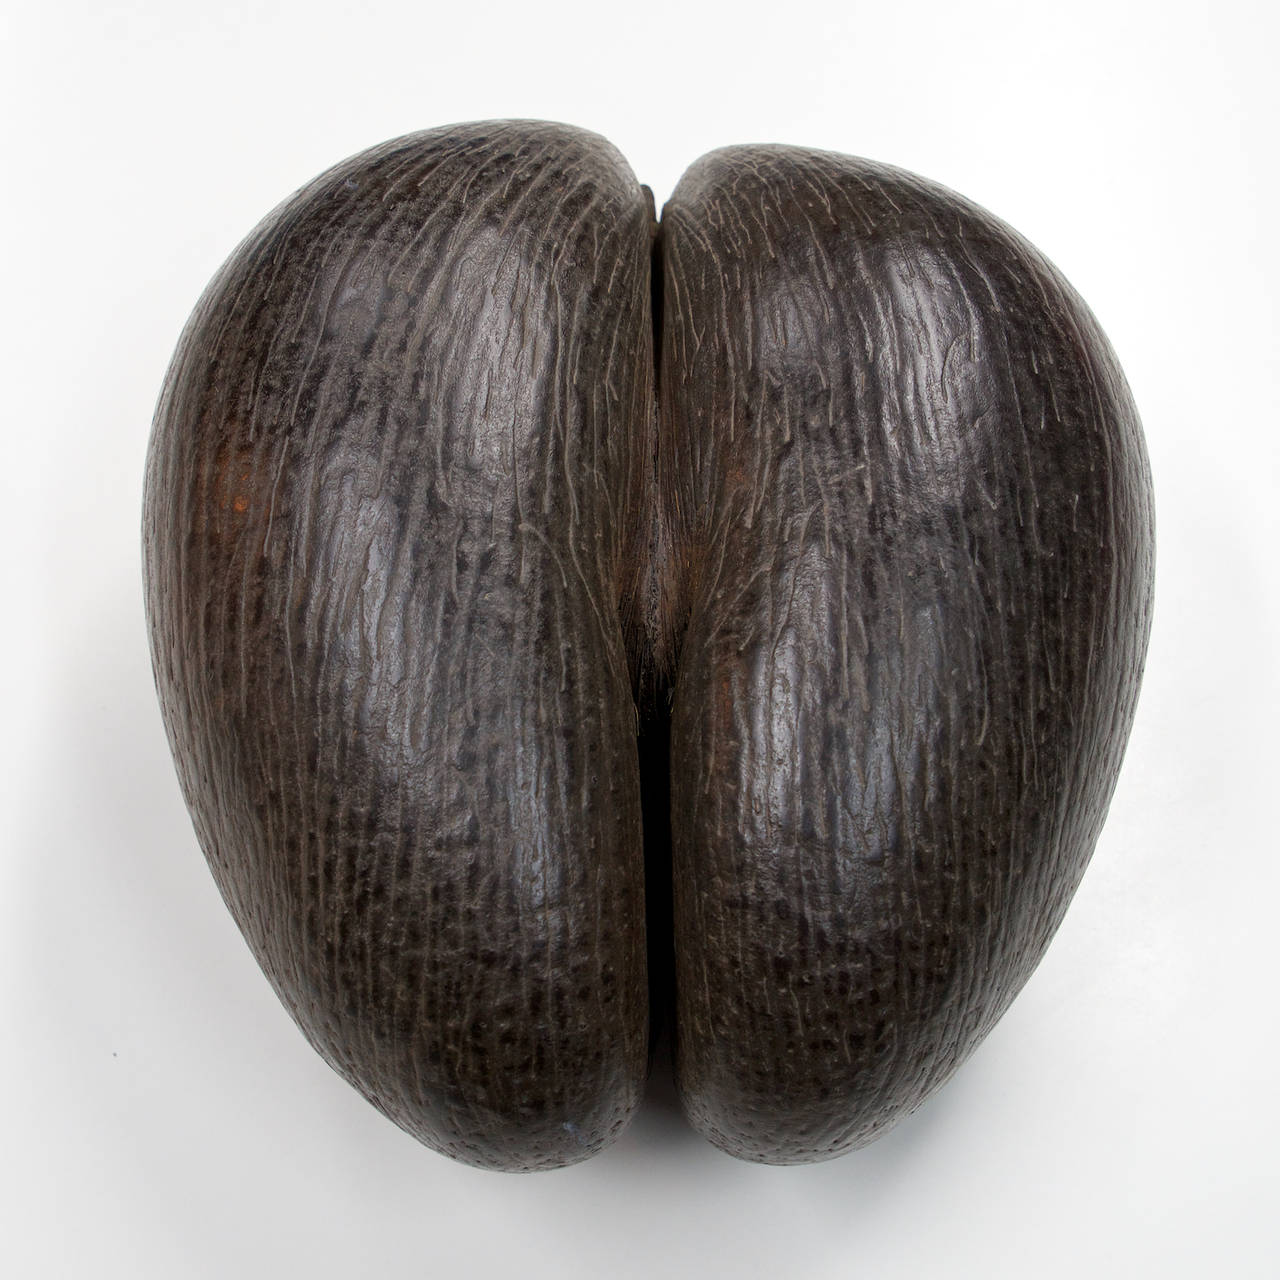 Rare find, a beautiful specimen of the largest nut in the plant kingdom, modern 50.